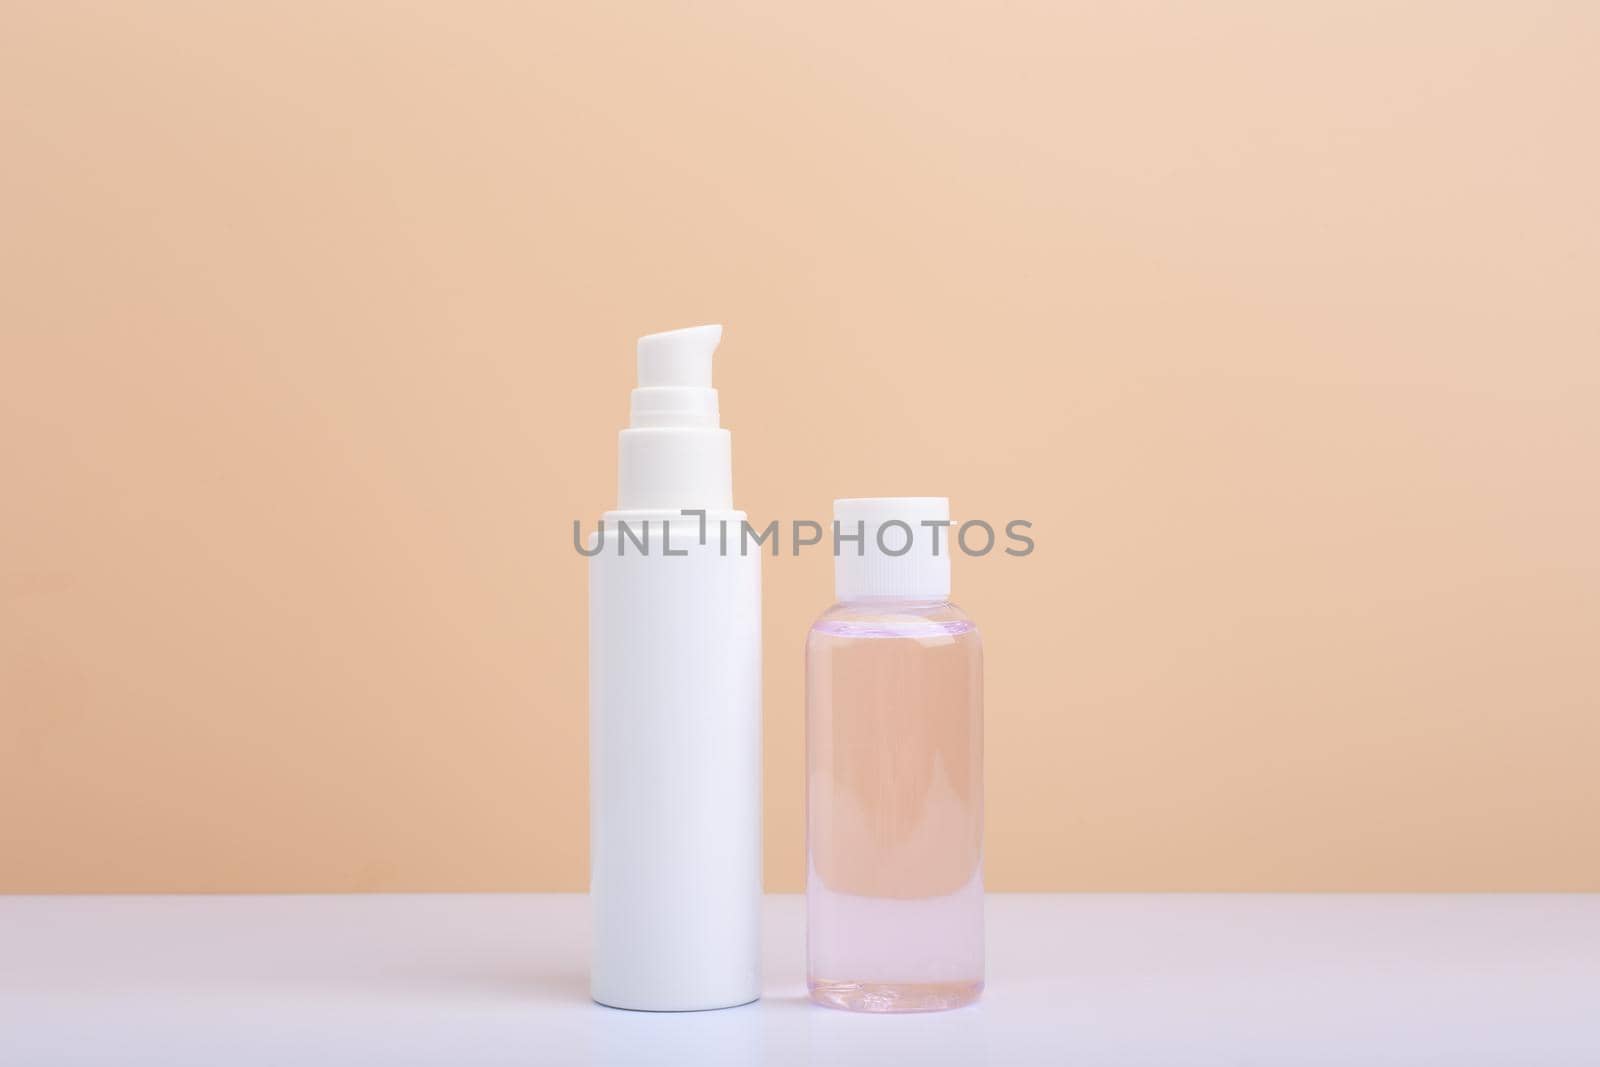 Face cream in white tube and skin lotion in transparent bottle against light beige background with copy space. Concept of beauty products and cosmetics with natural organic ingredients